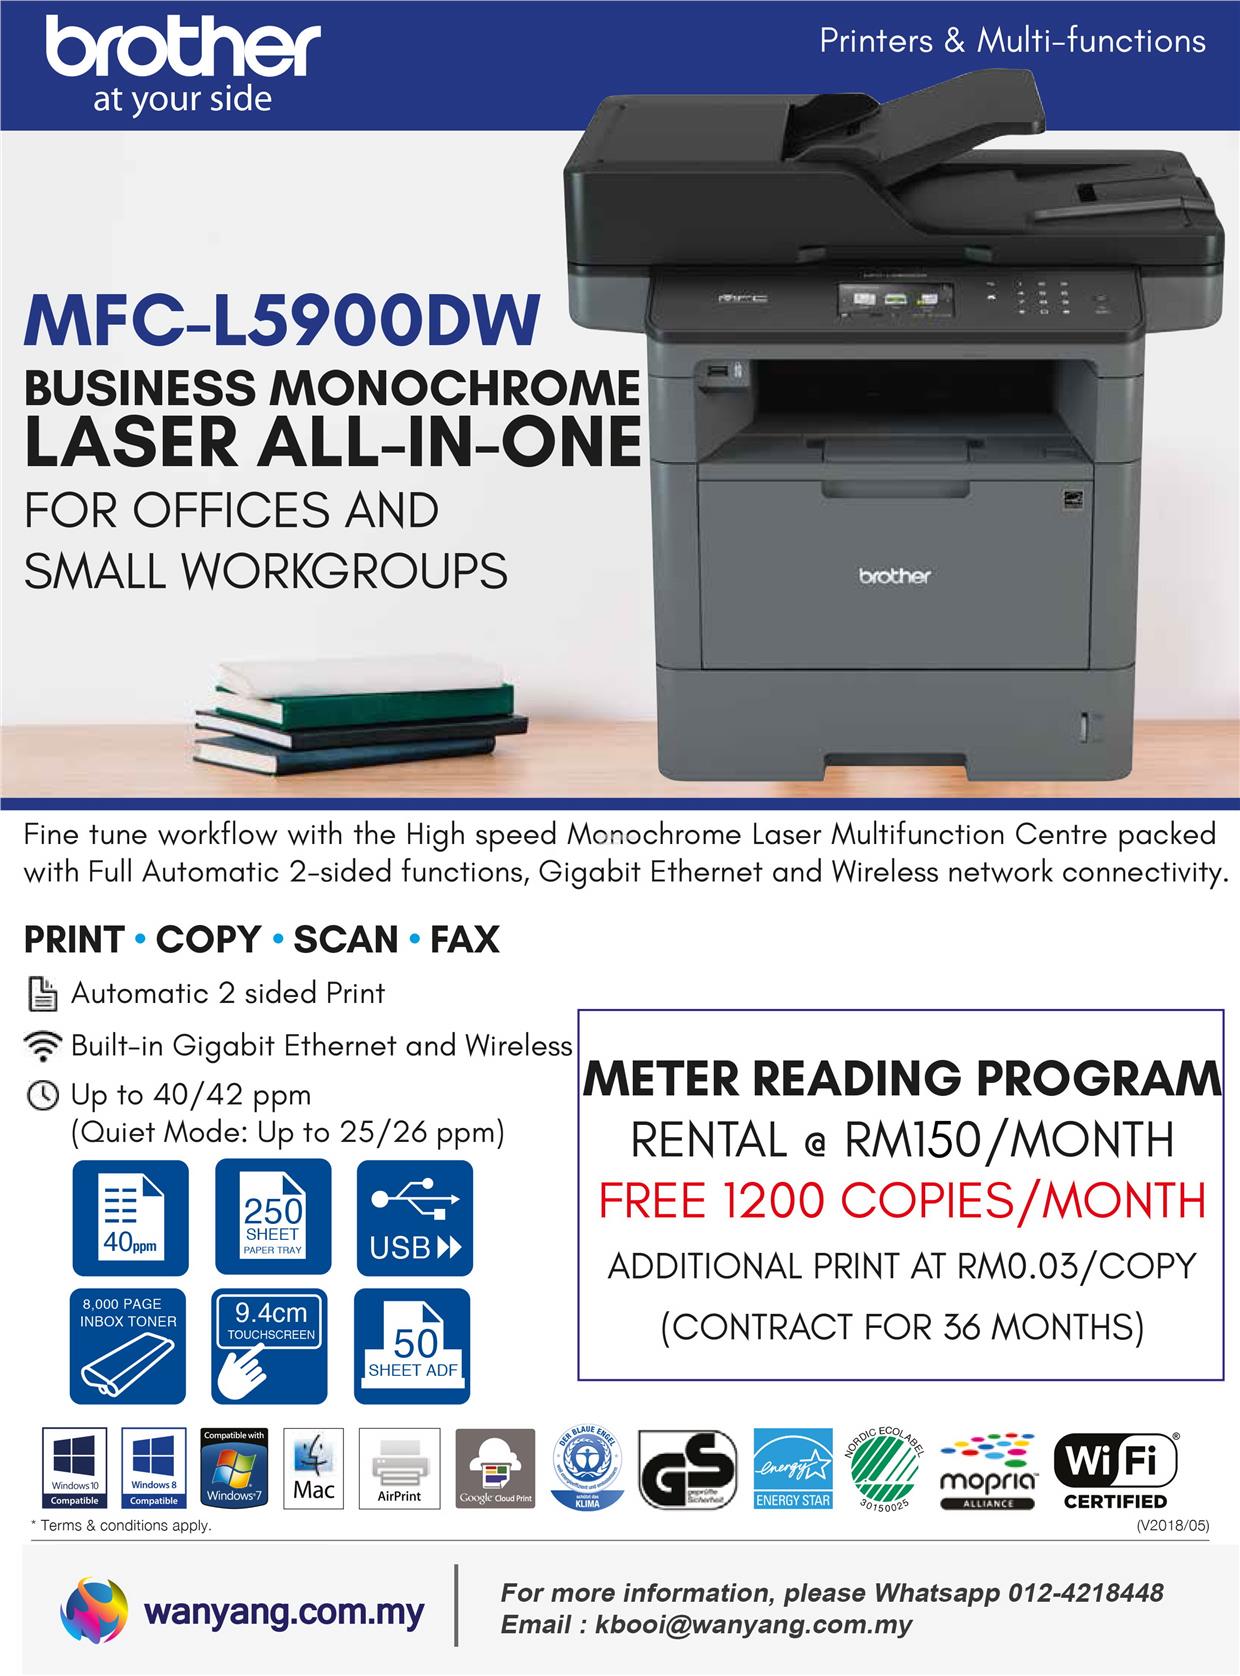 Its time to upgrade your old copier to“ Brand  New “business mono